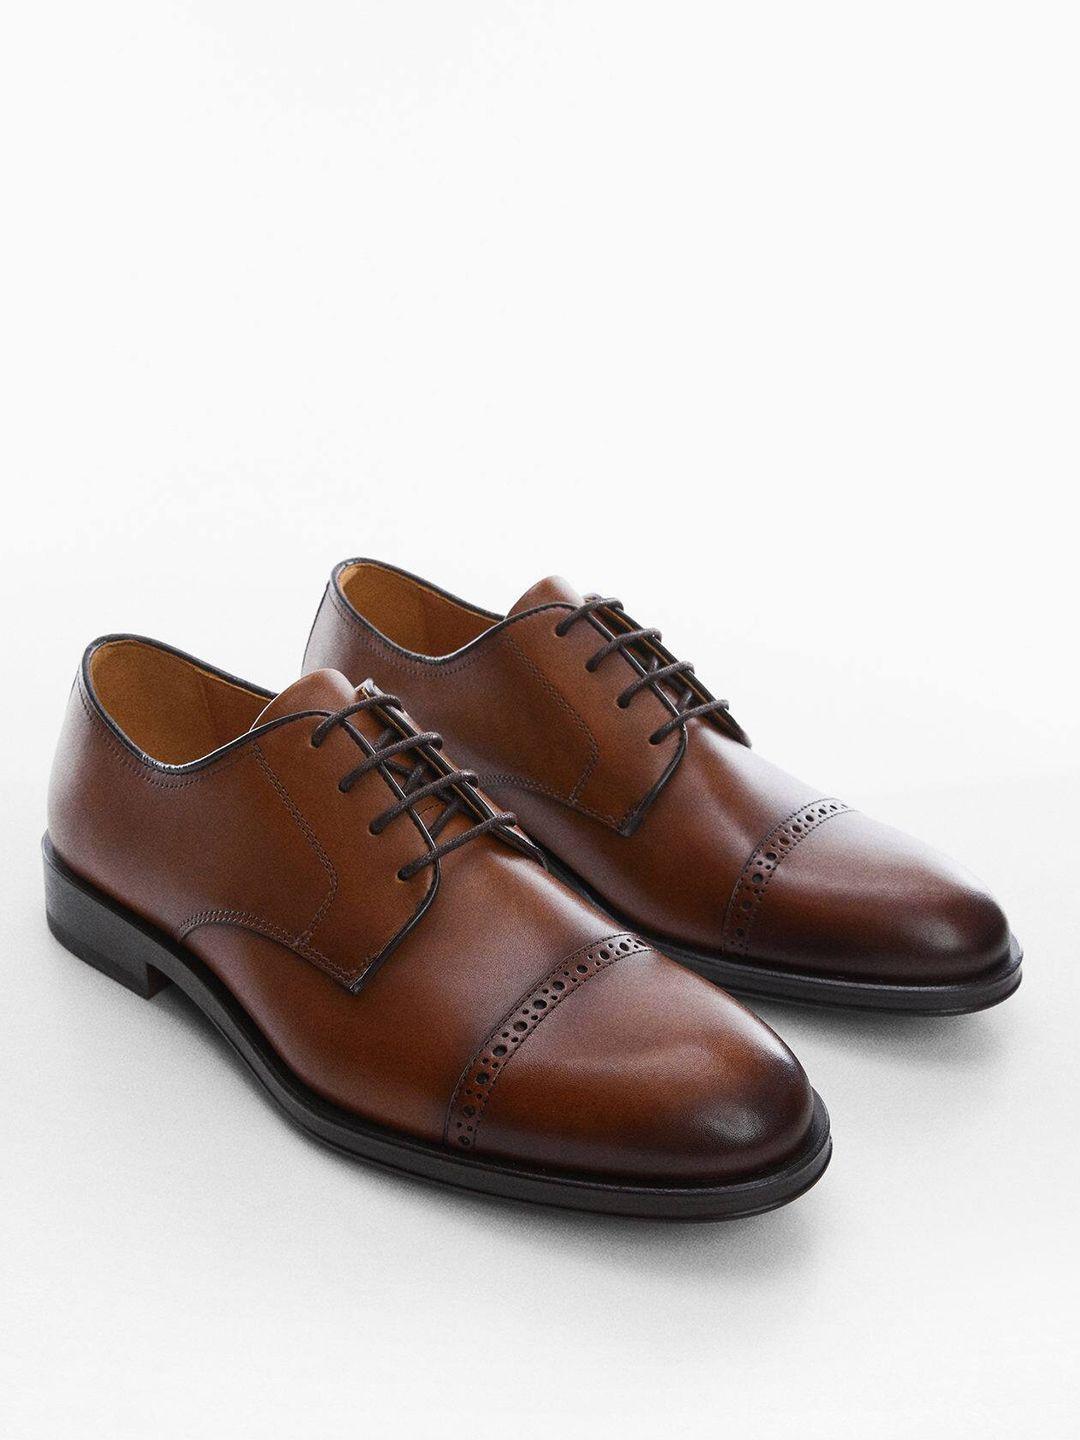 mango-man-leather-derbys-with-brogue-detail